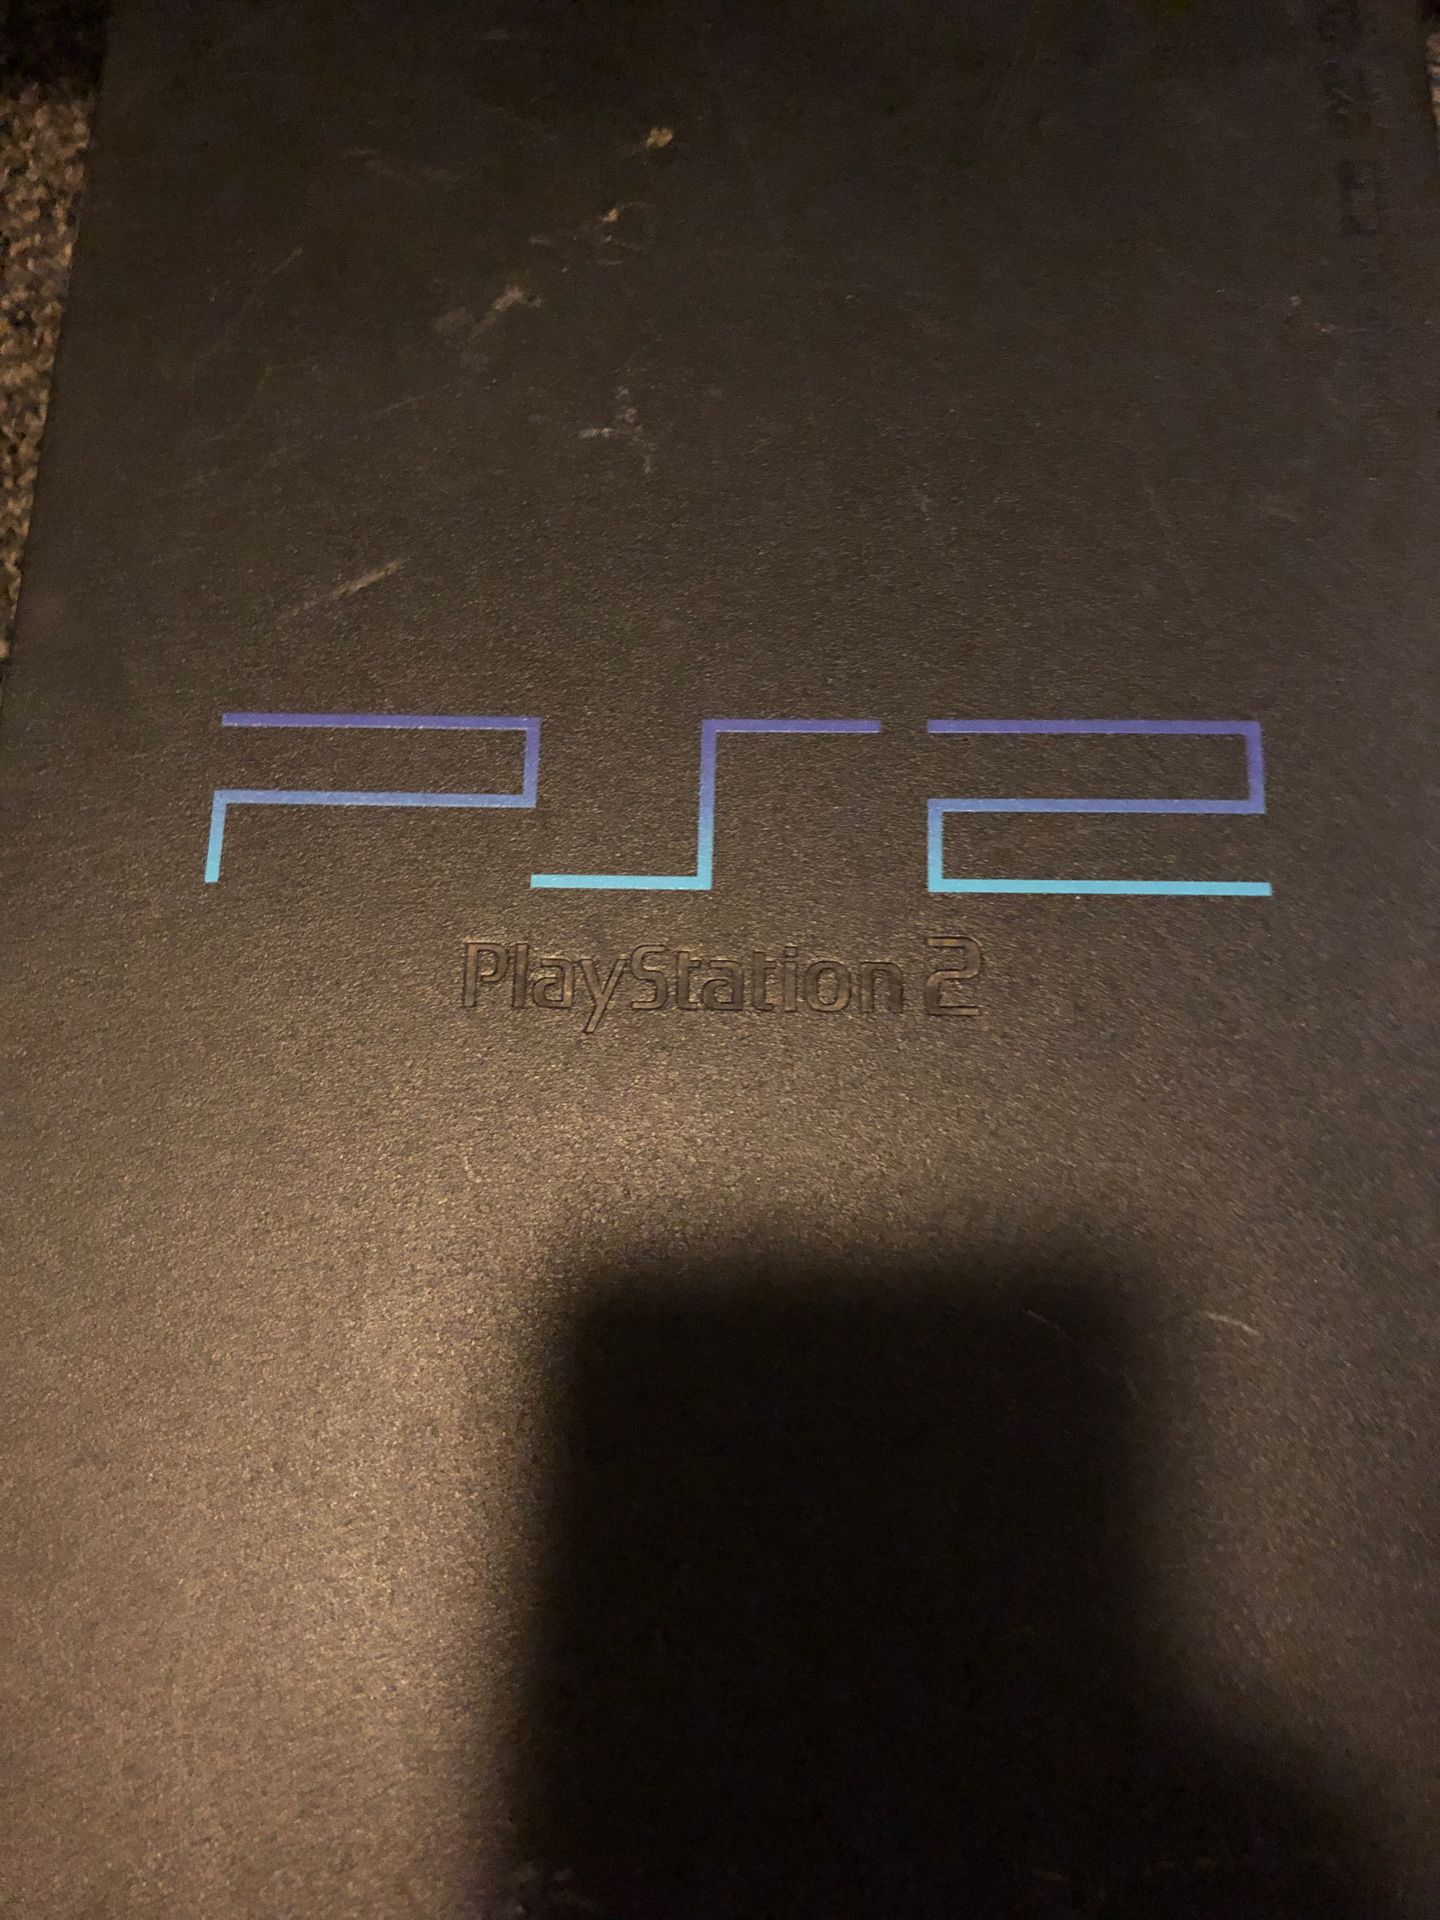 Ps2 system